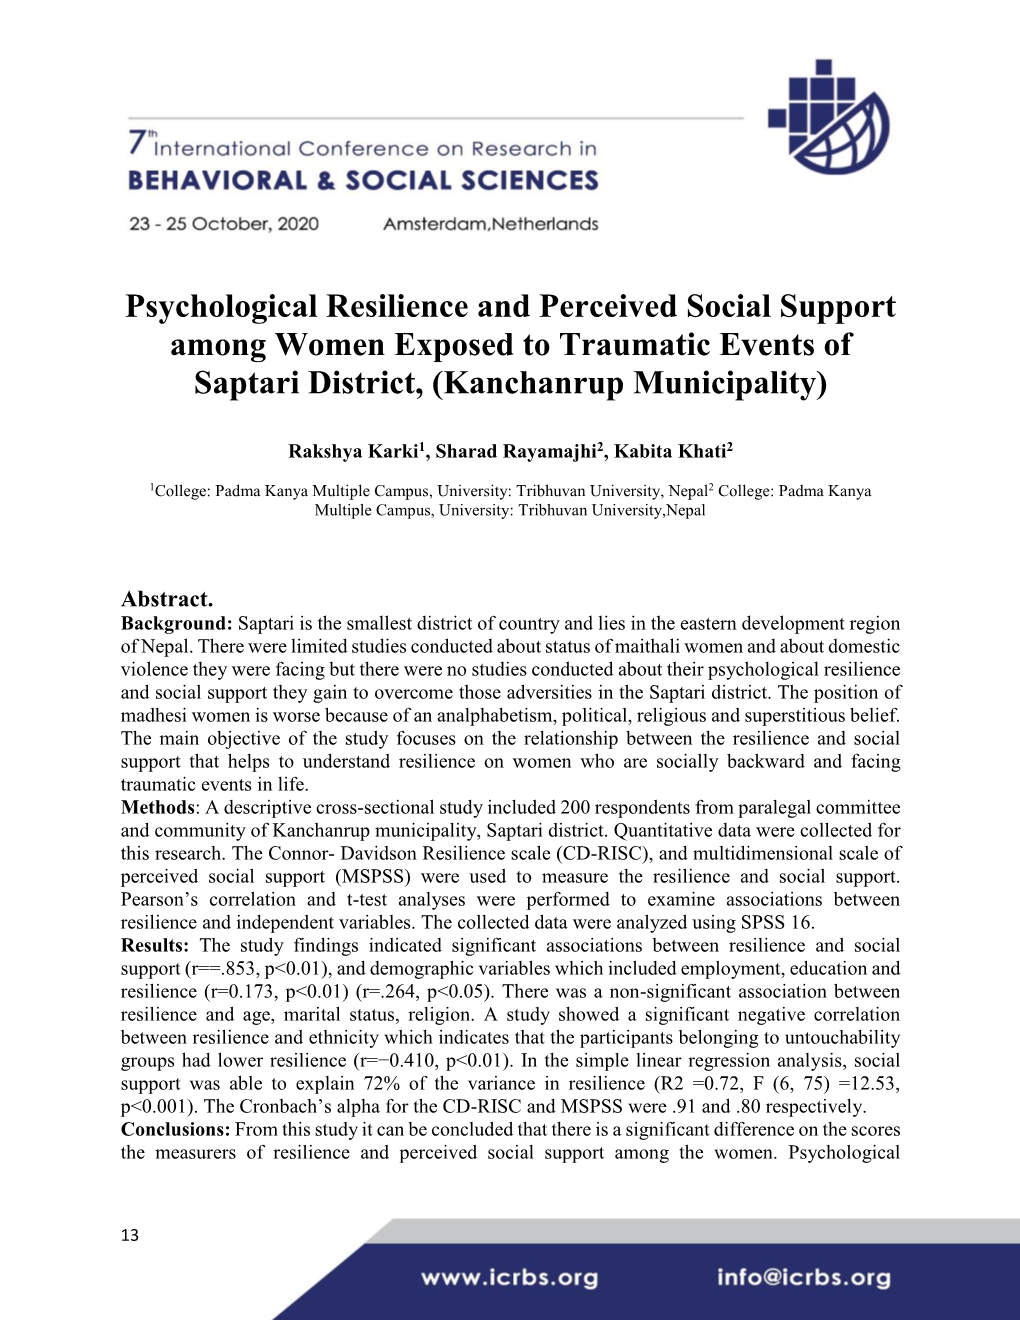 Psychological Resilience and Perceived Social Support Among Women Exposed to Traumatic Events of Saptari District, (Kanchanrup Municipality)